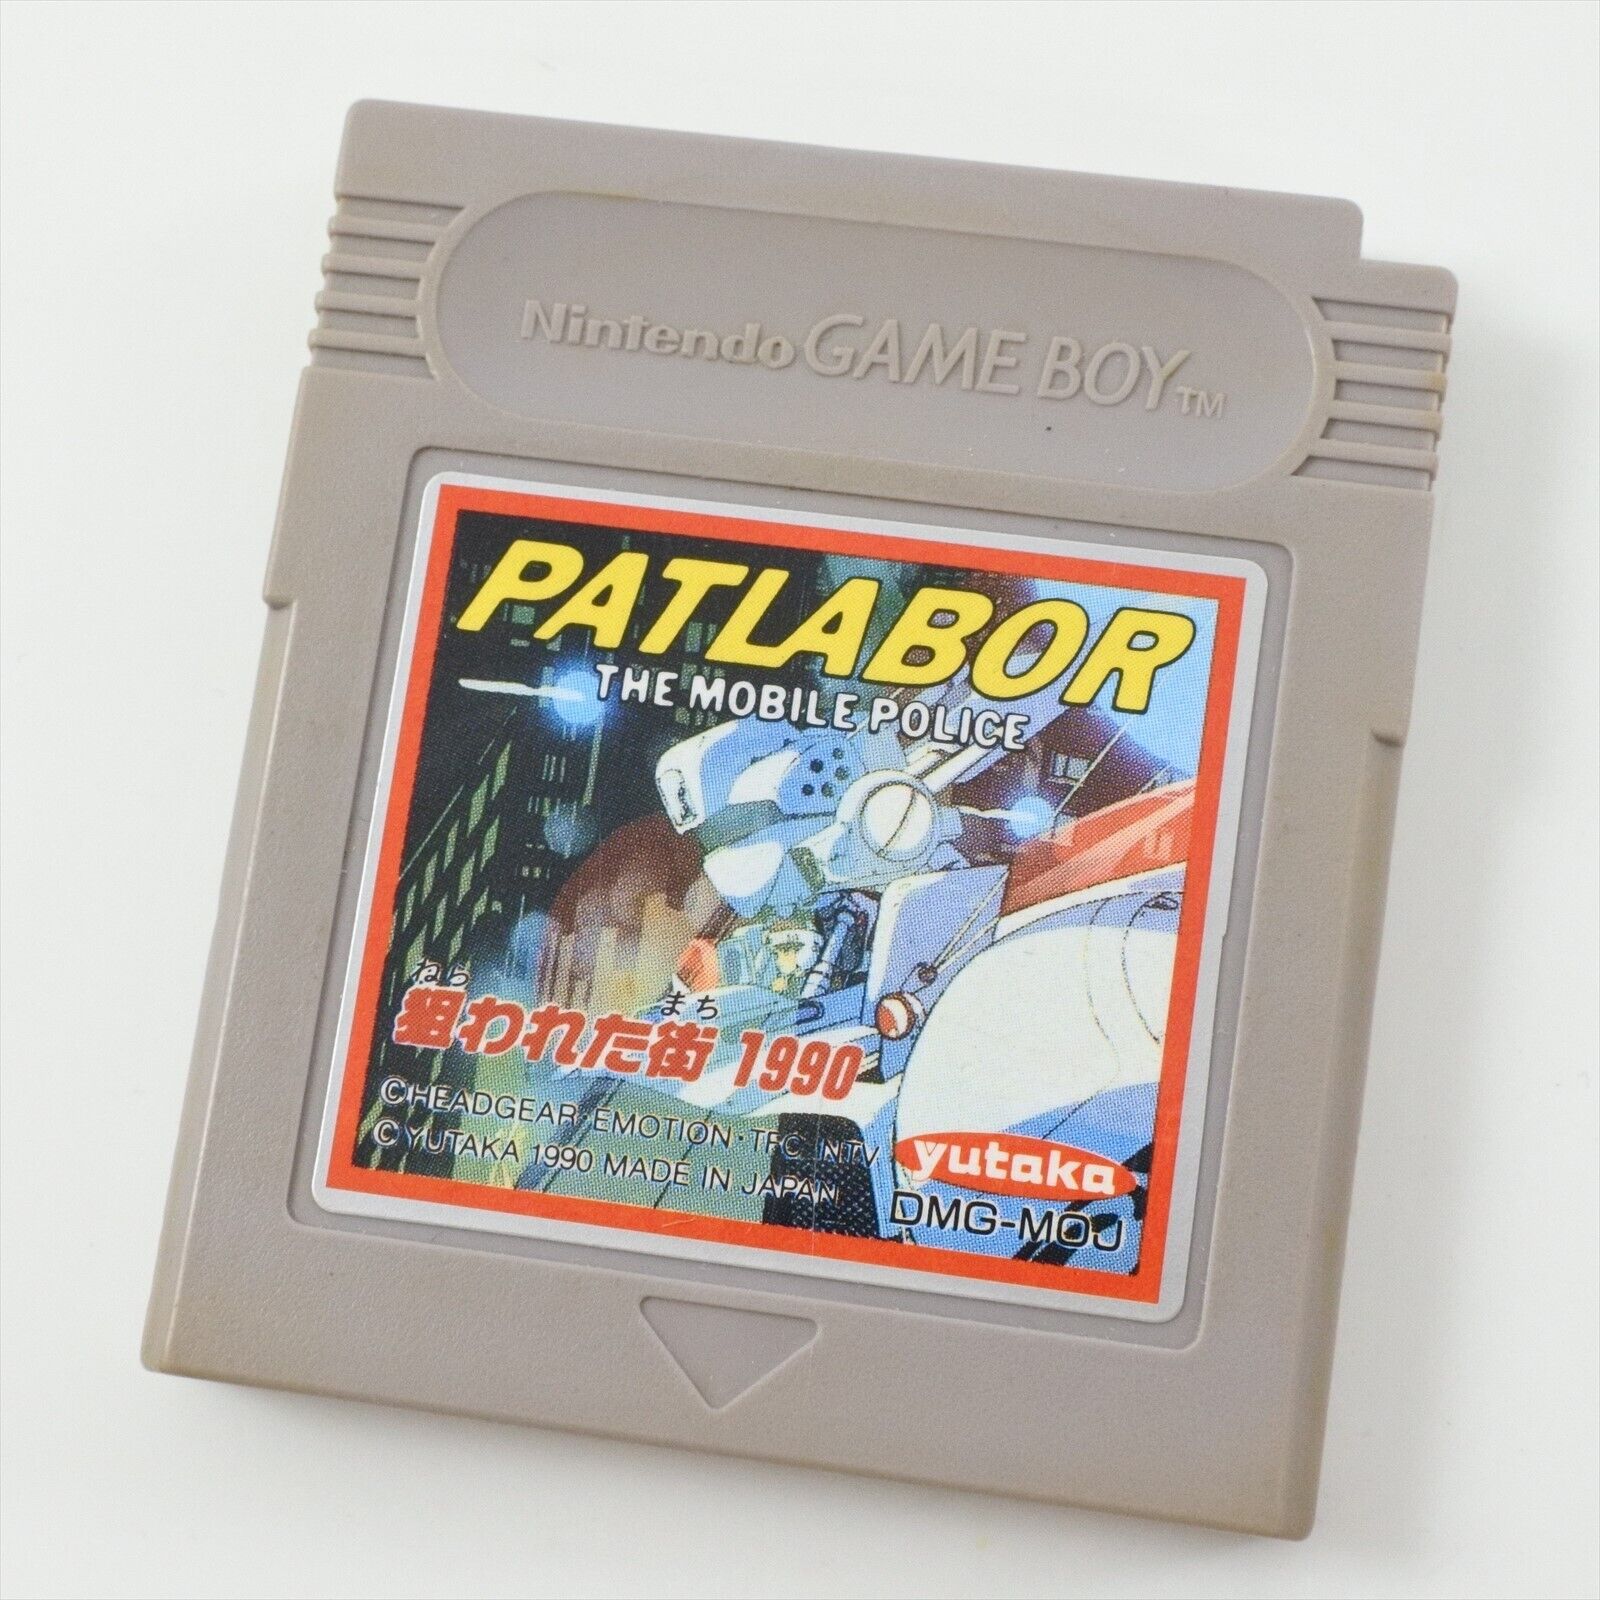 Gameboy Nintendo PATLABOR THE MOBILE POLICE Cartridge Only gbc